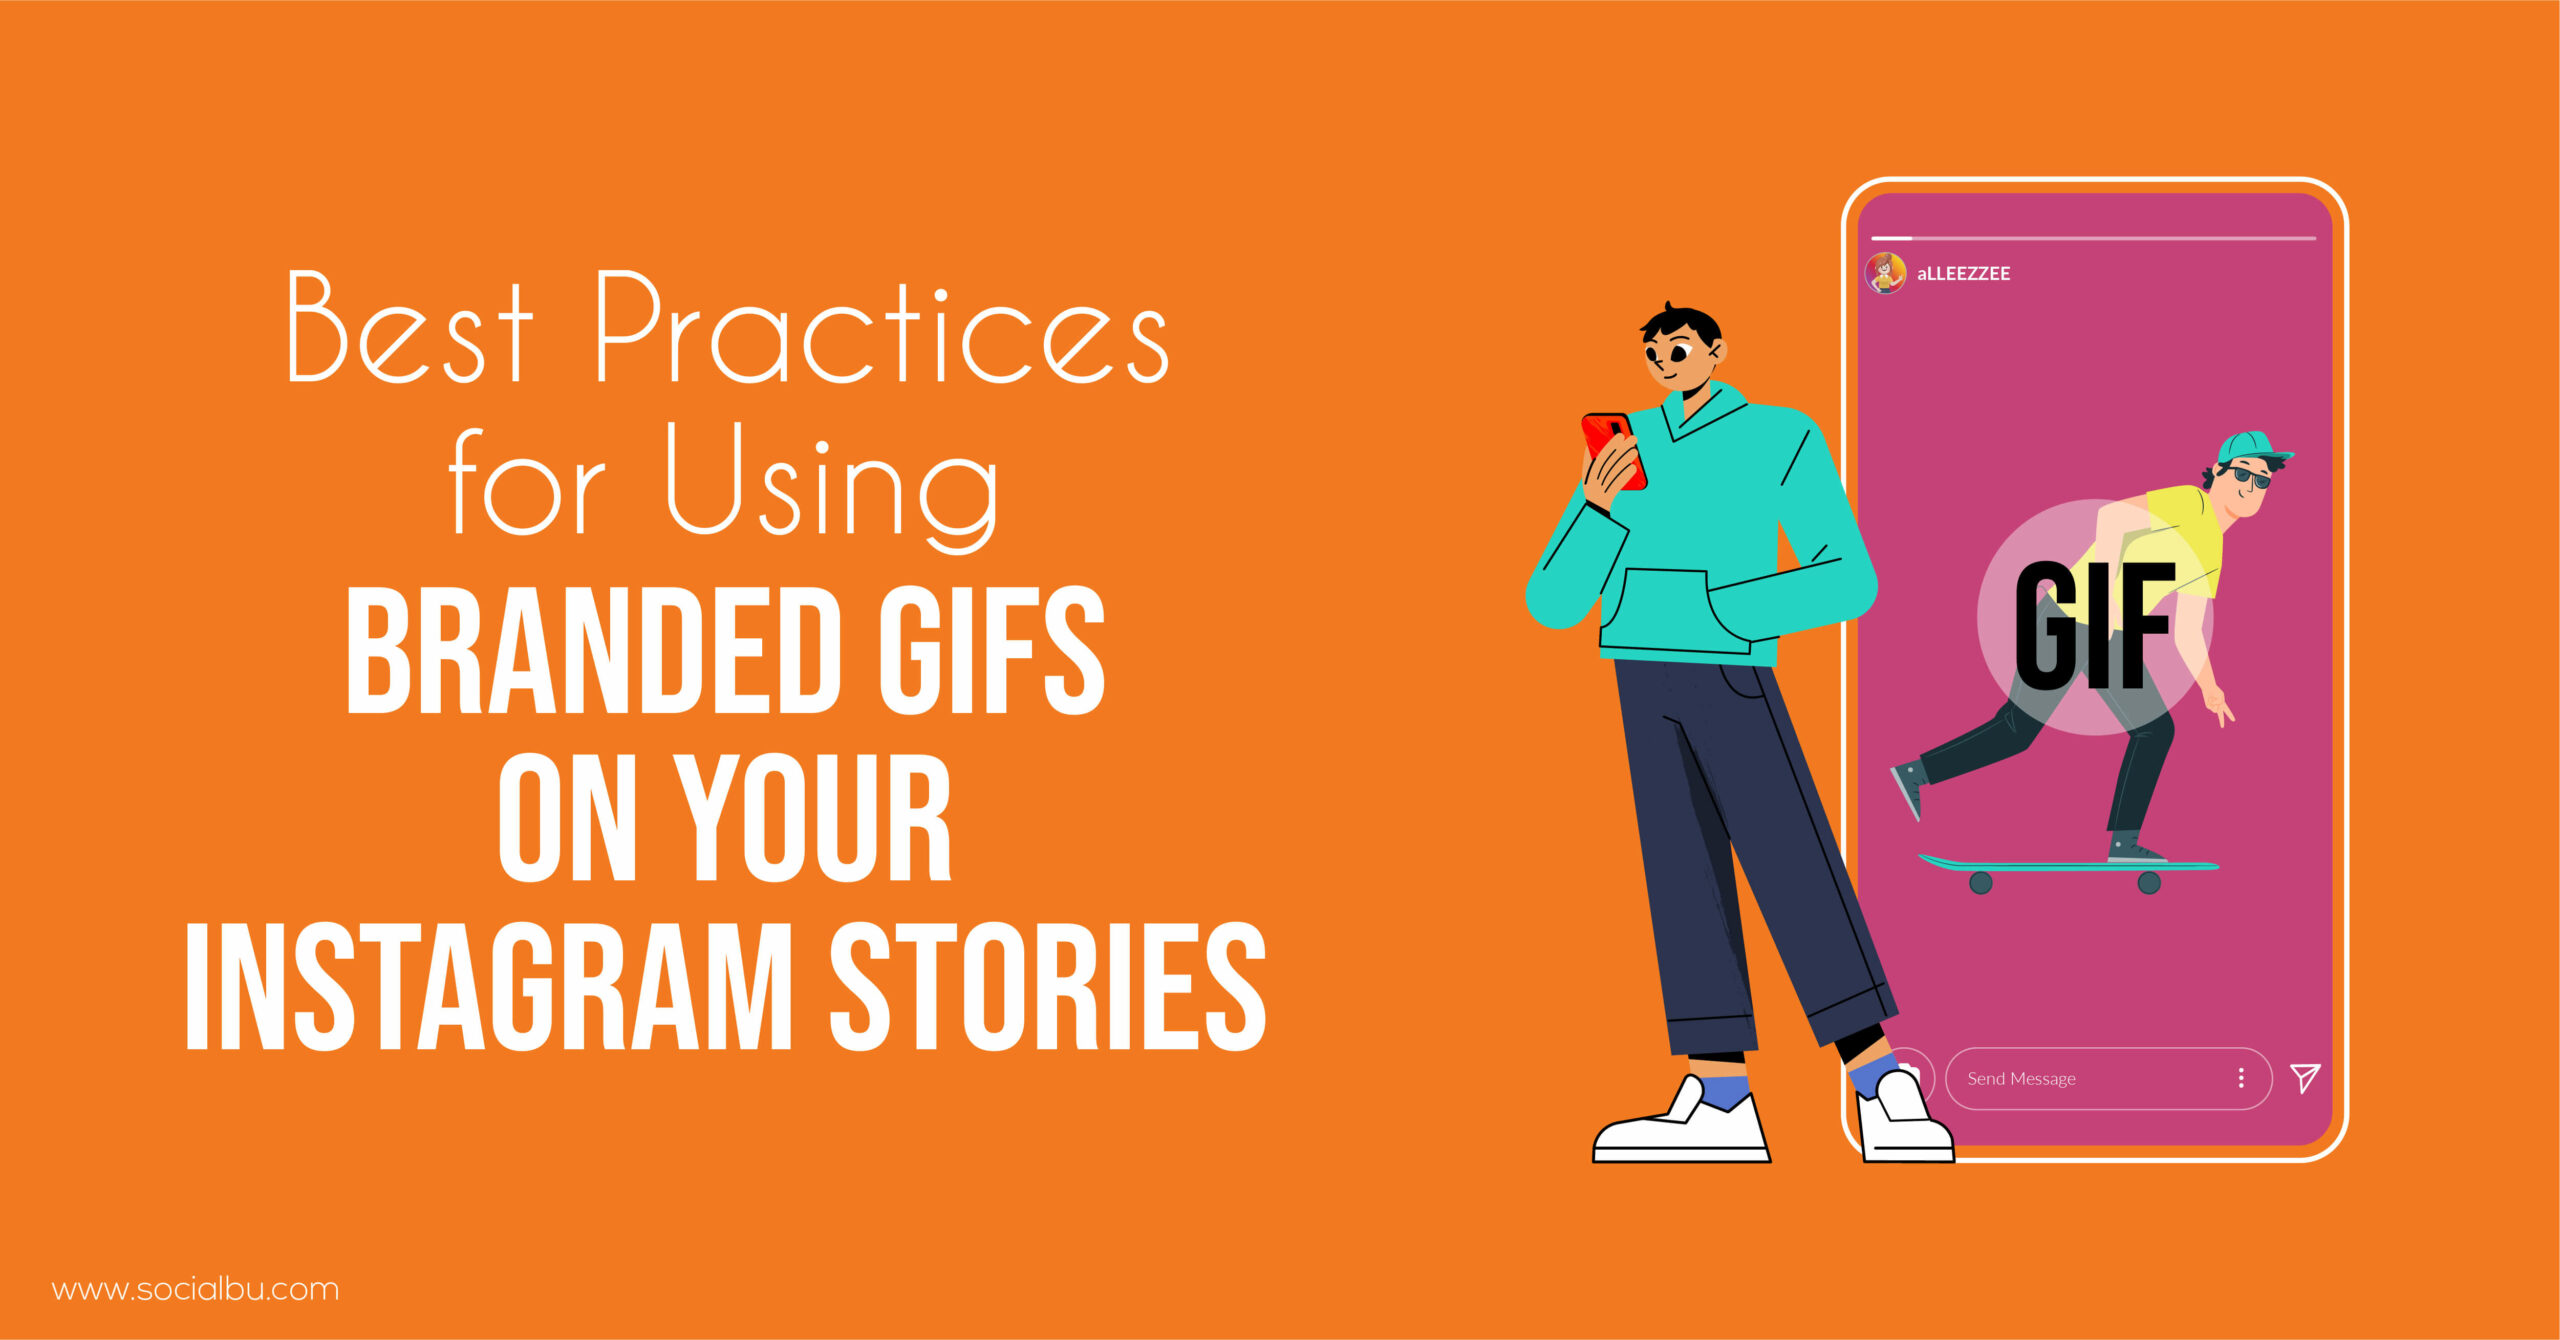 Add Some Humor to Your Instagram Story With a GIF